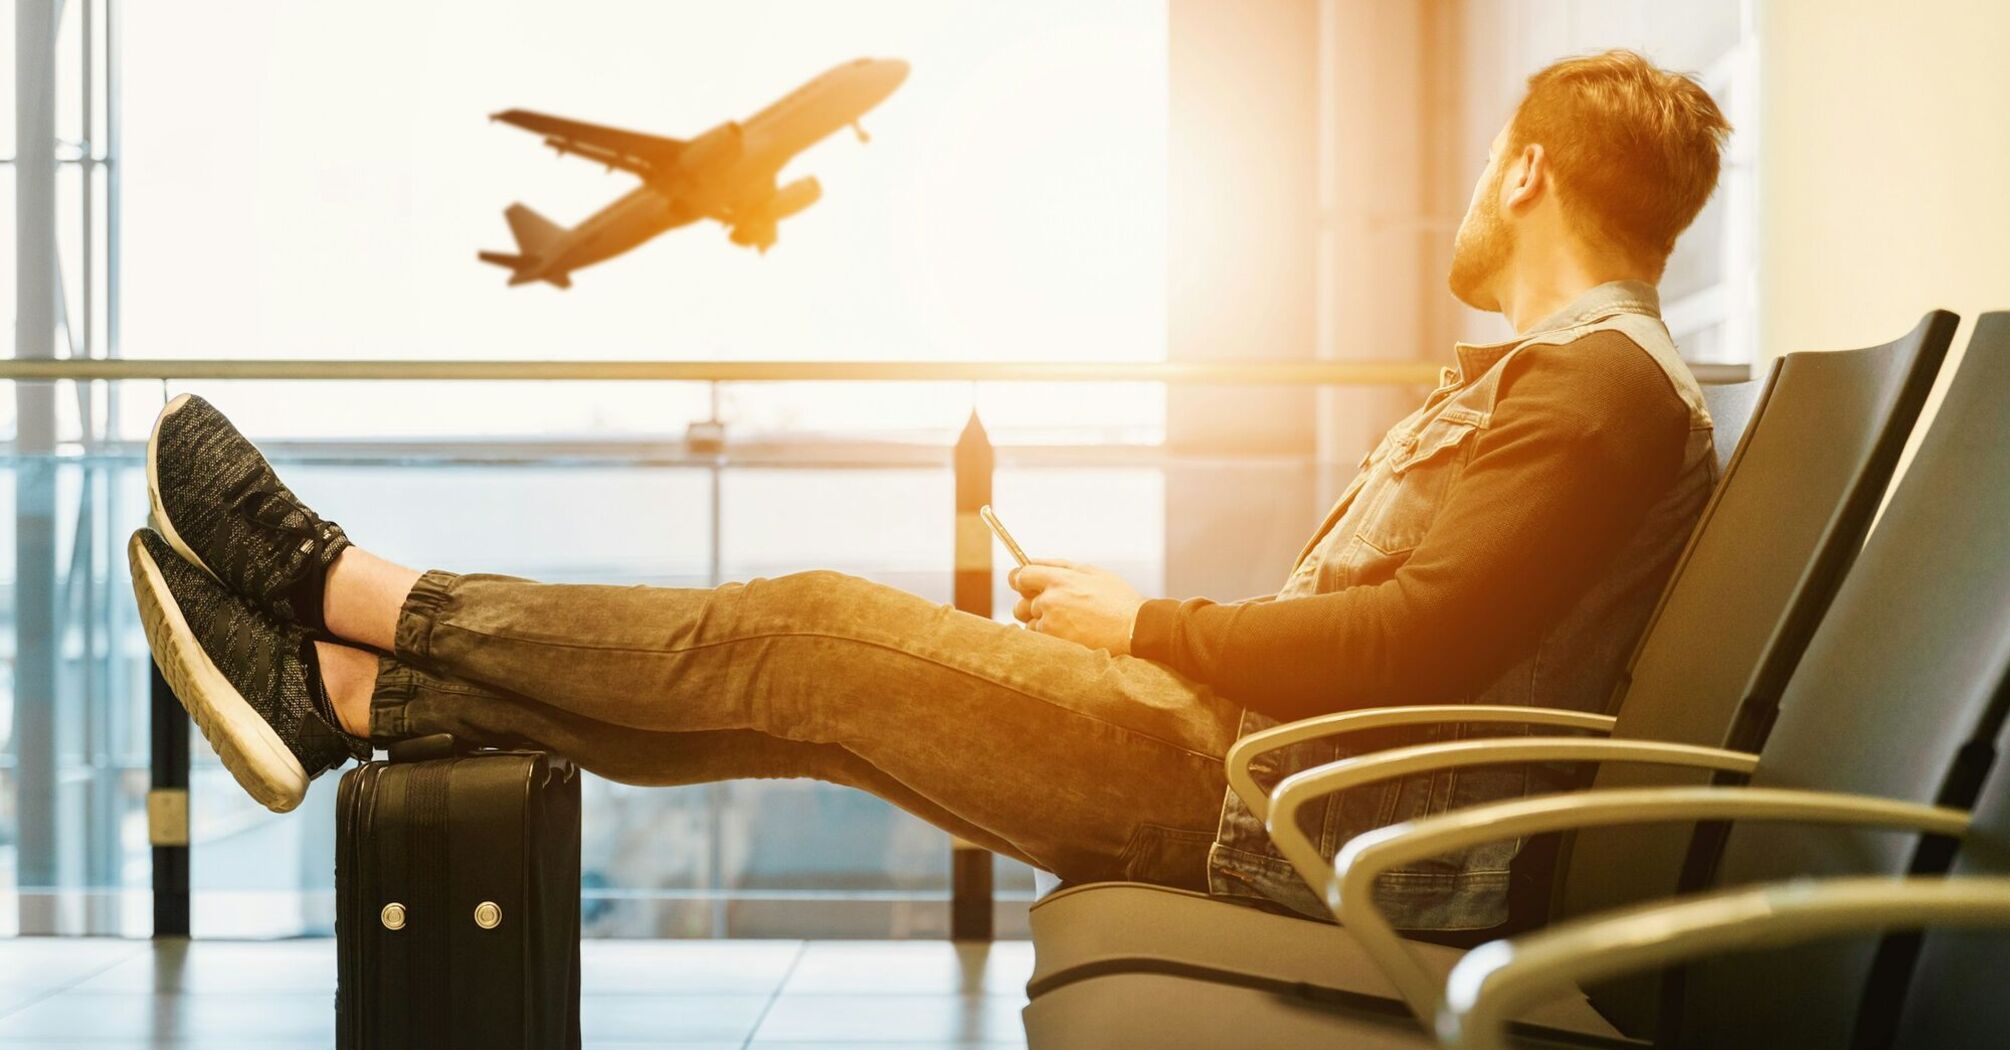 A traveler sitting relaxed in an airport lounge with feet up on a suitcase, looking at a smartphone, with an airplane taking off in the background through the window